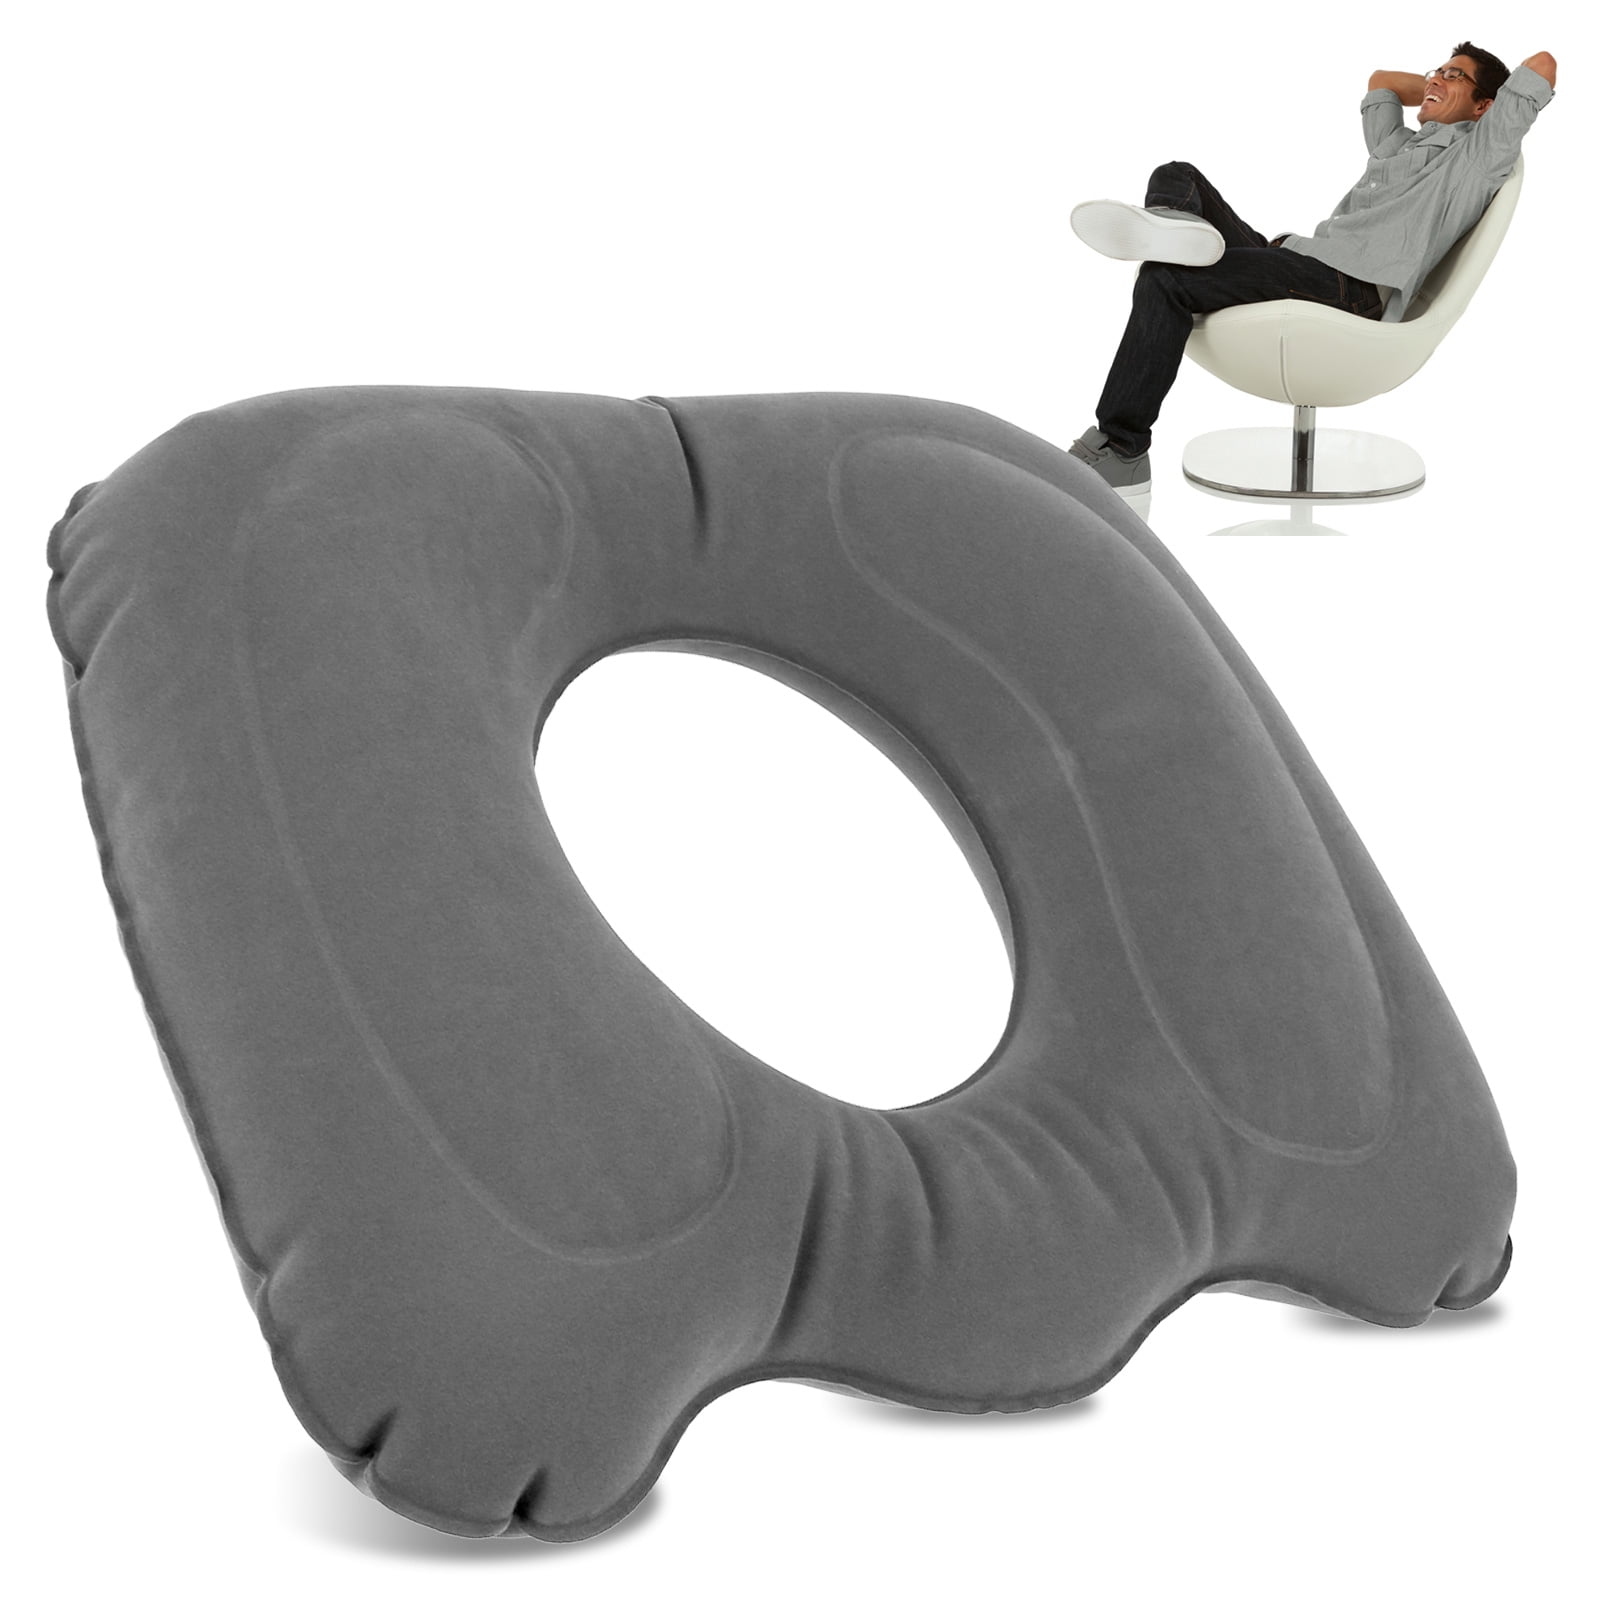 Everlasting Comfort ® Versatile Donut Pillow for Hemorrhoids, Tailbone Pain  Relief - FSA HSA Approved Transformable 2-in-1 Hemorrhoid Cushion + Seat